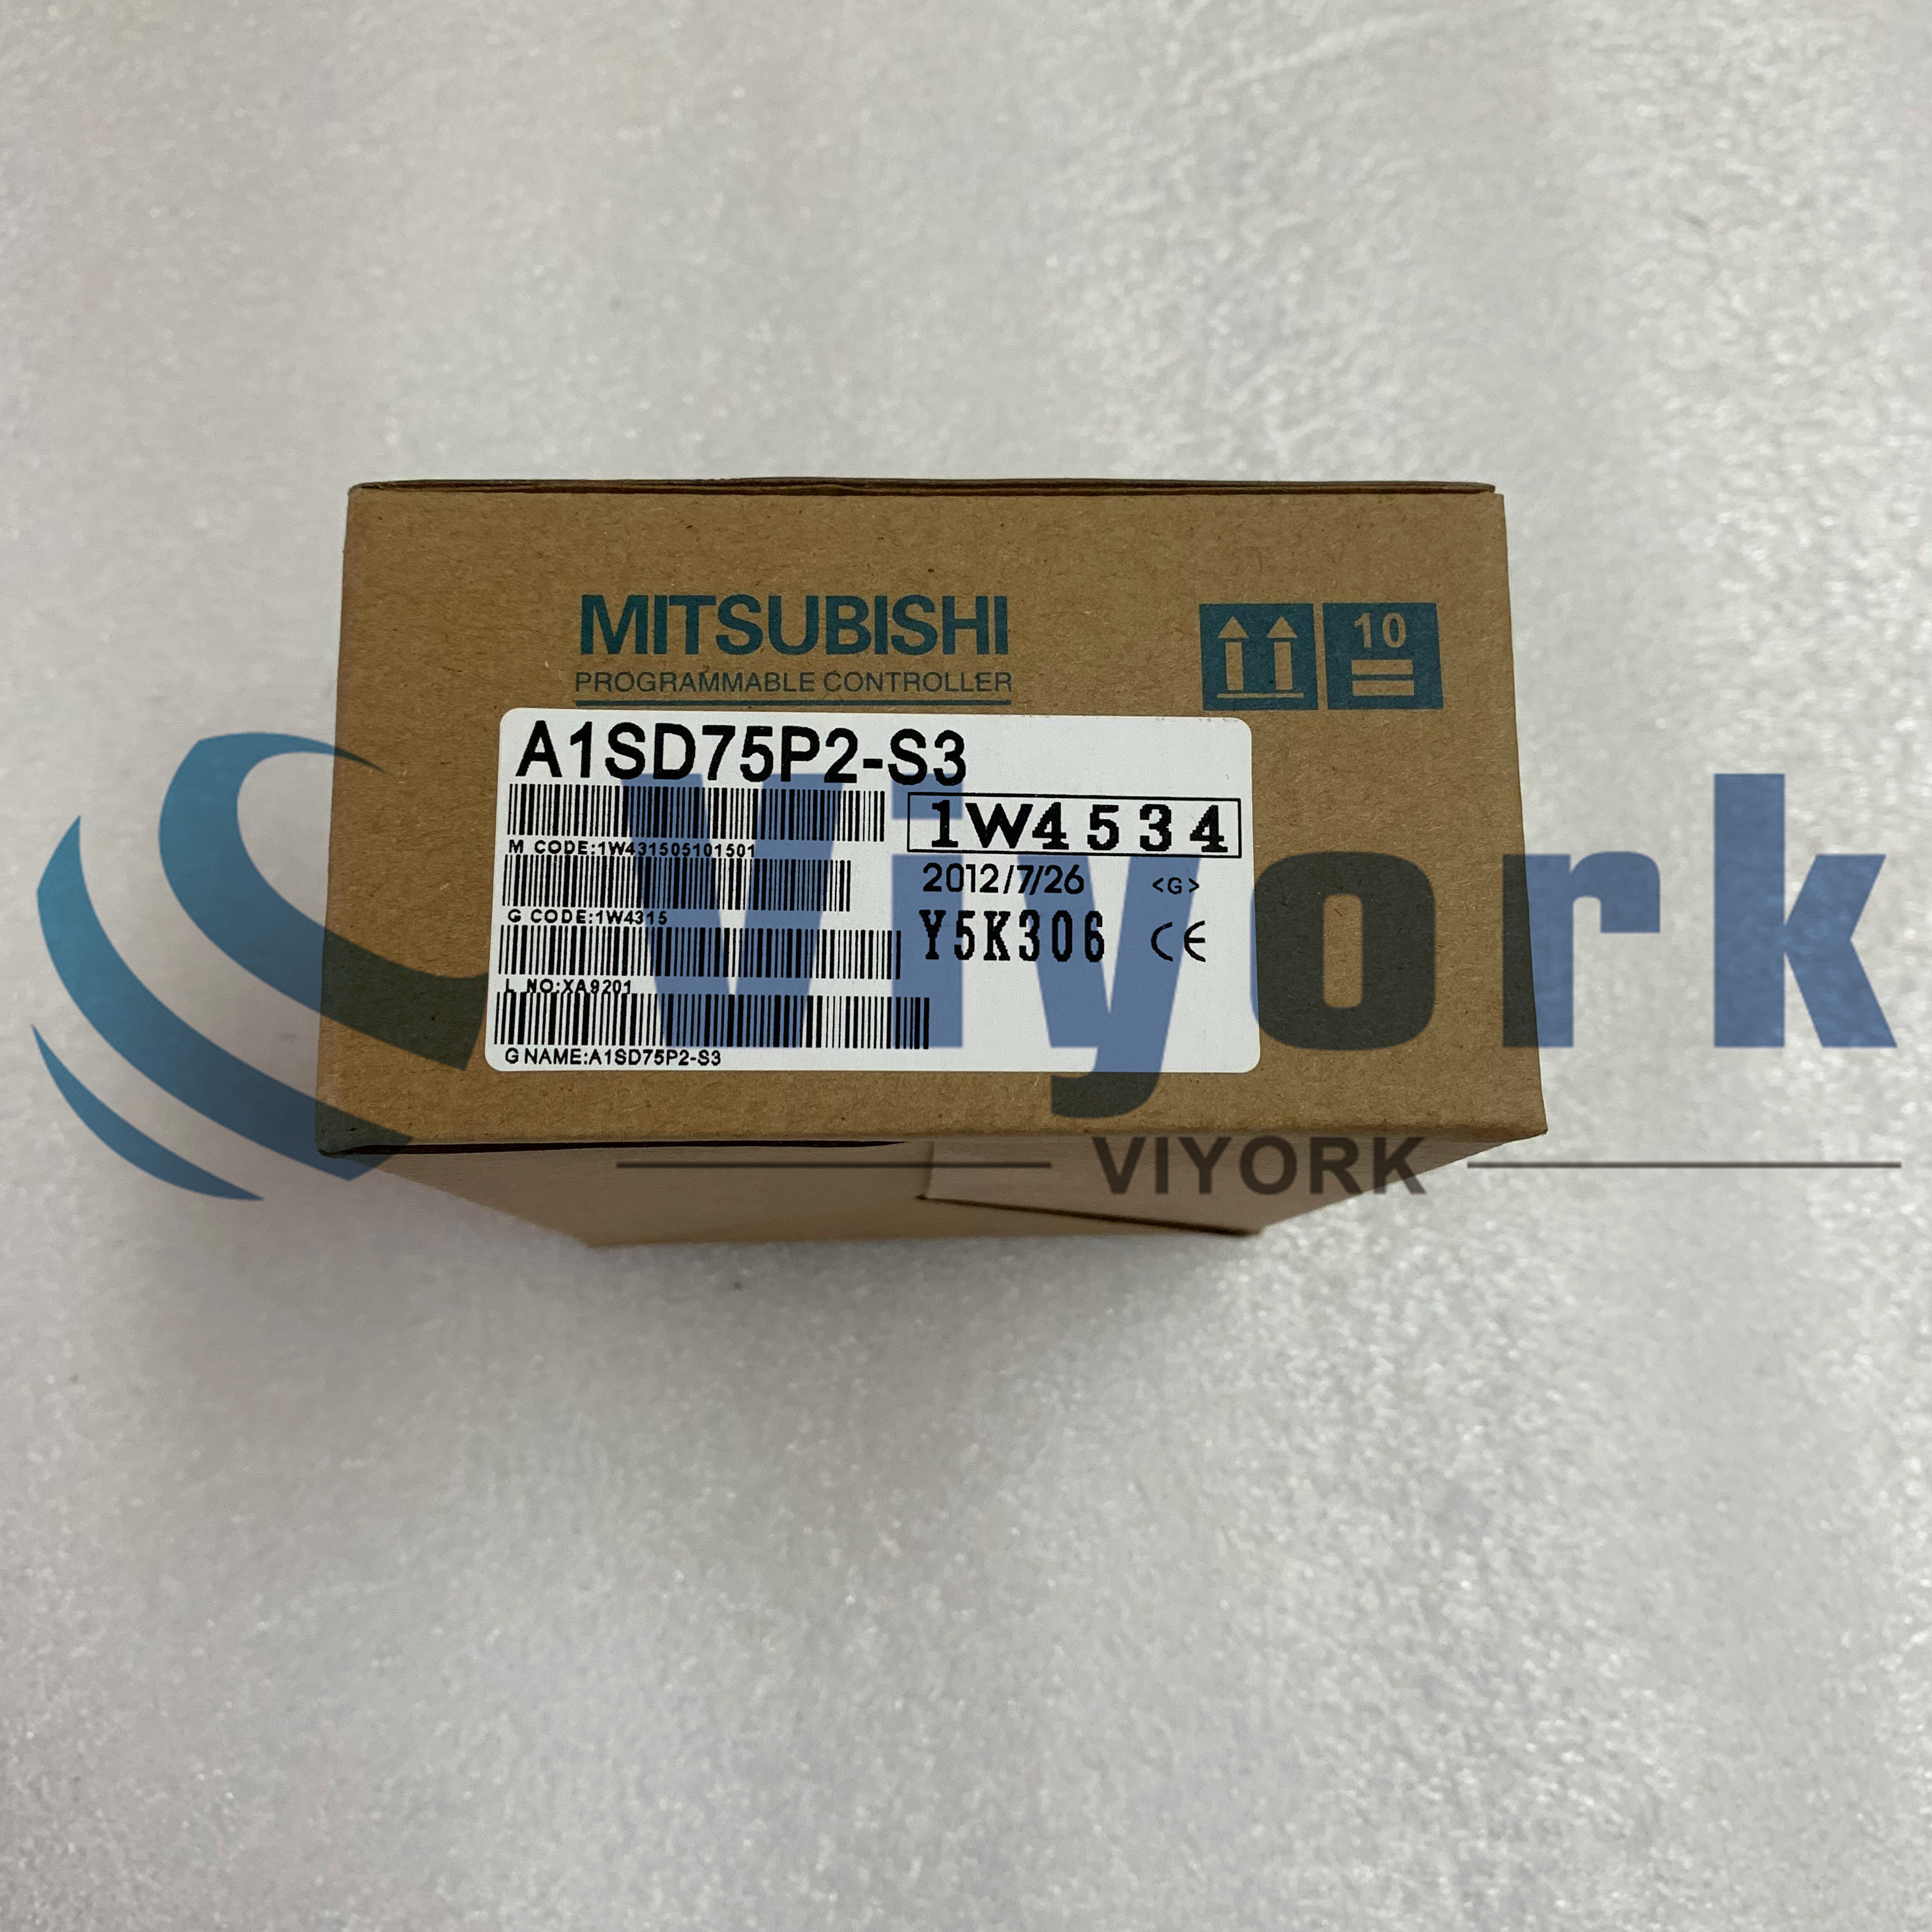 Mitsubishi A1SD75P2-S3 POSITIONING UNIT 2 AXES PTP 0.7AMPS AT 5VDC NEW